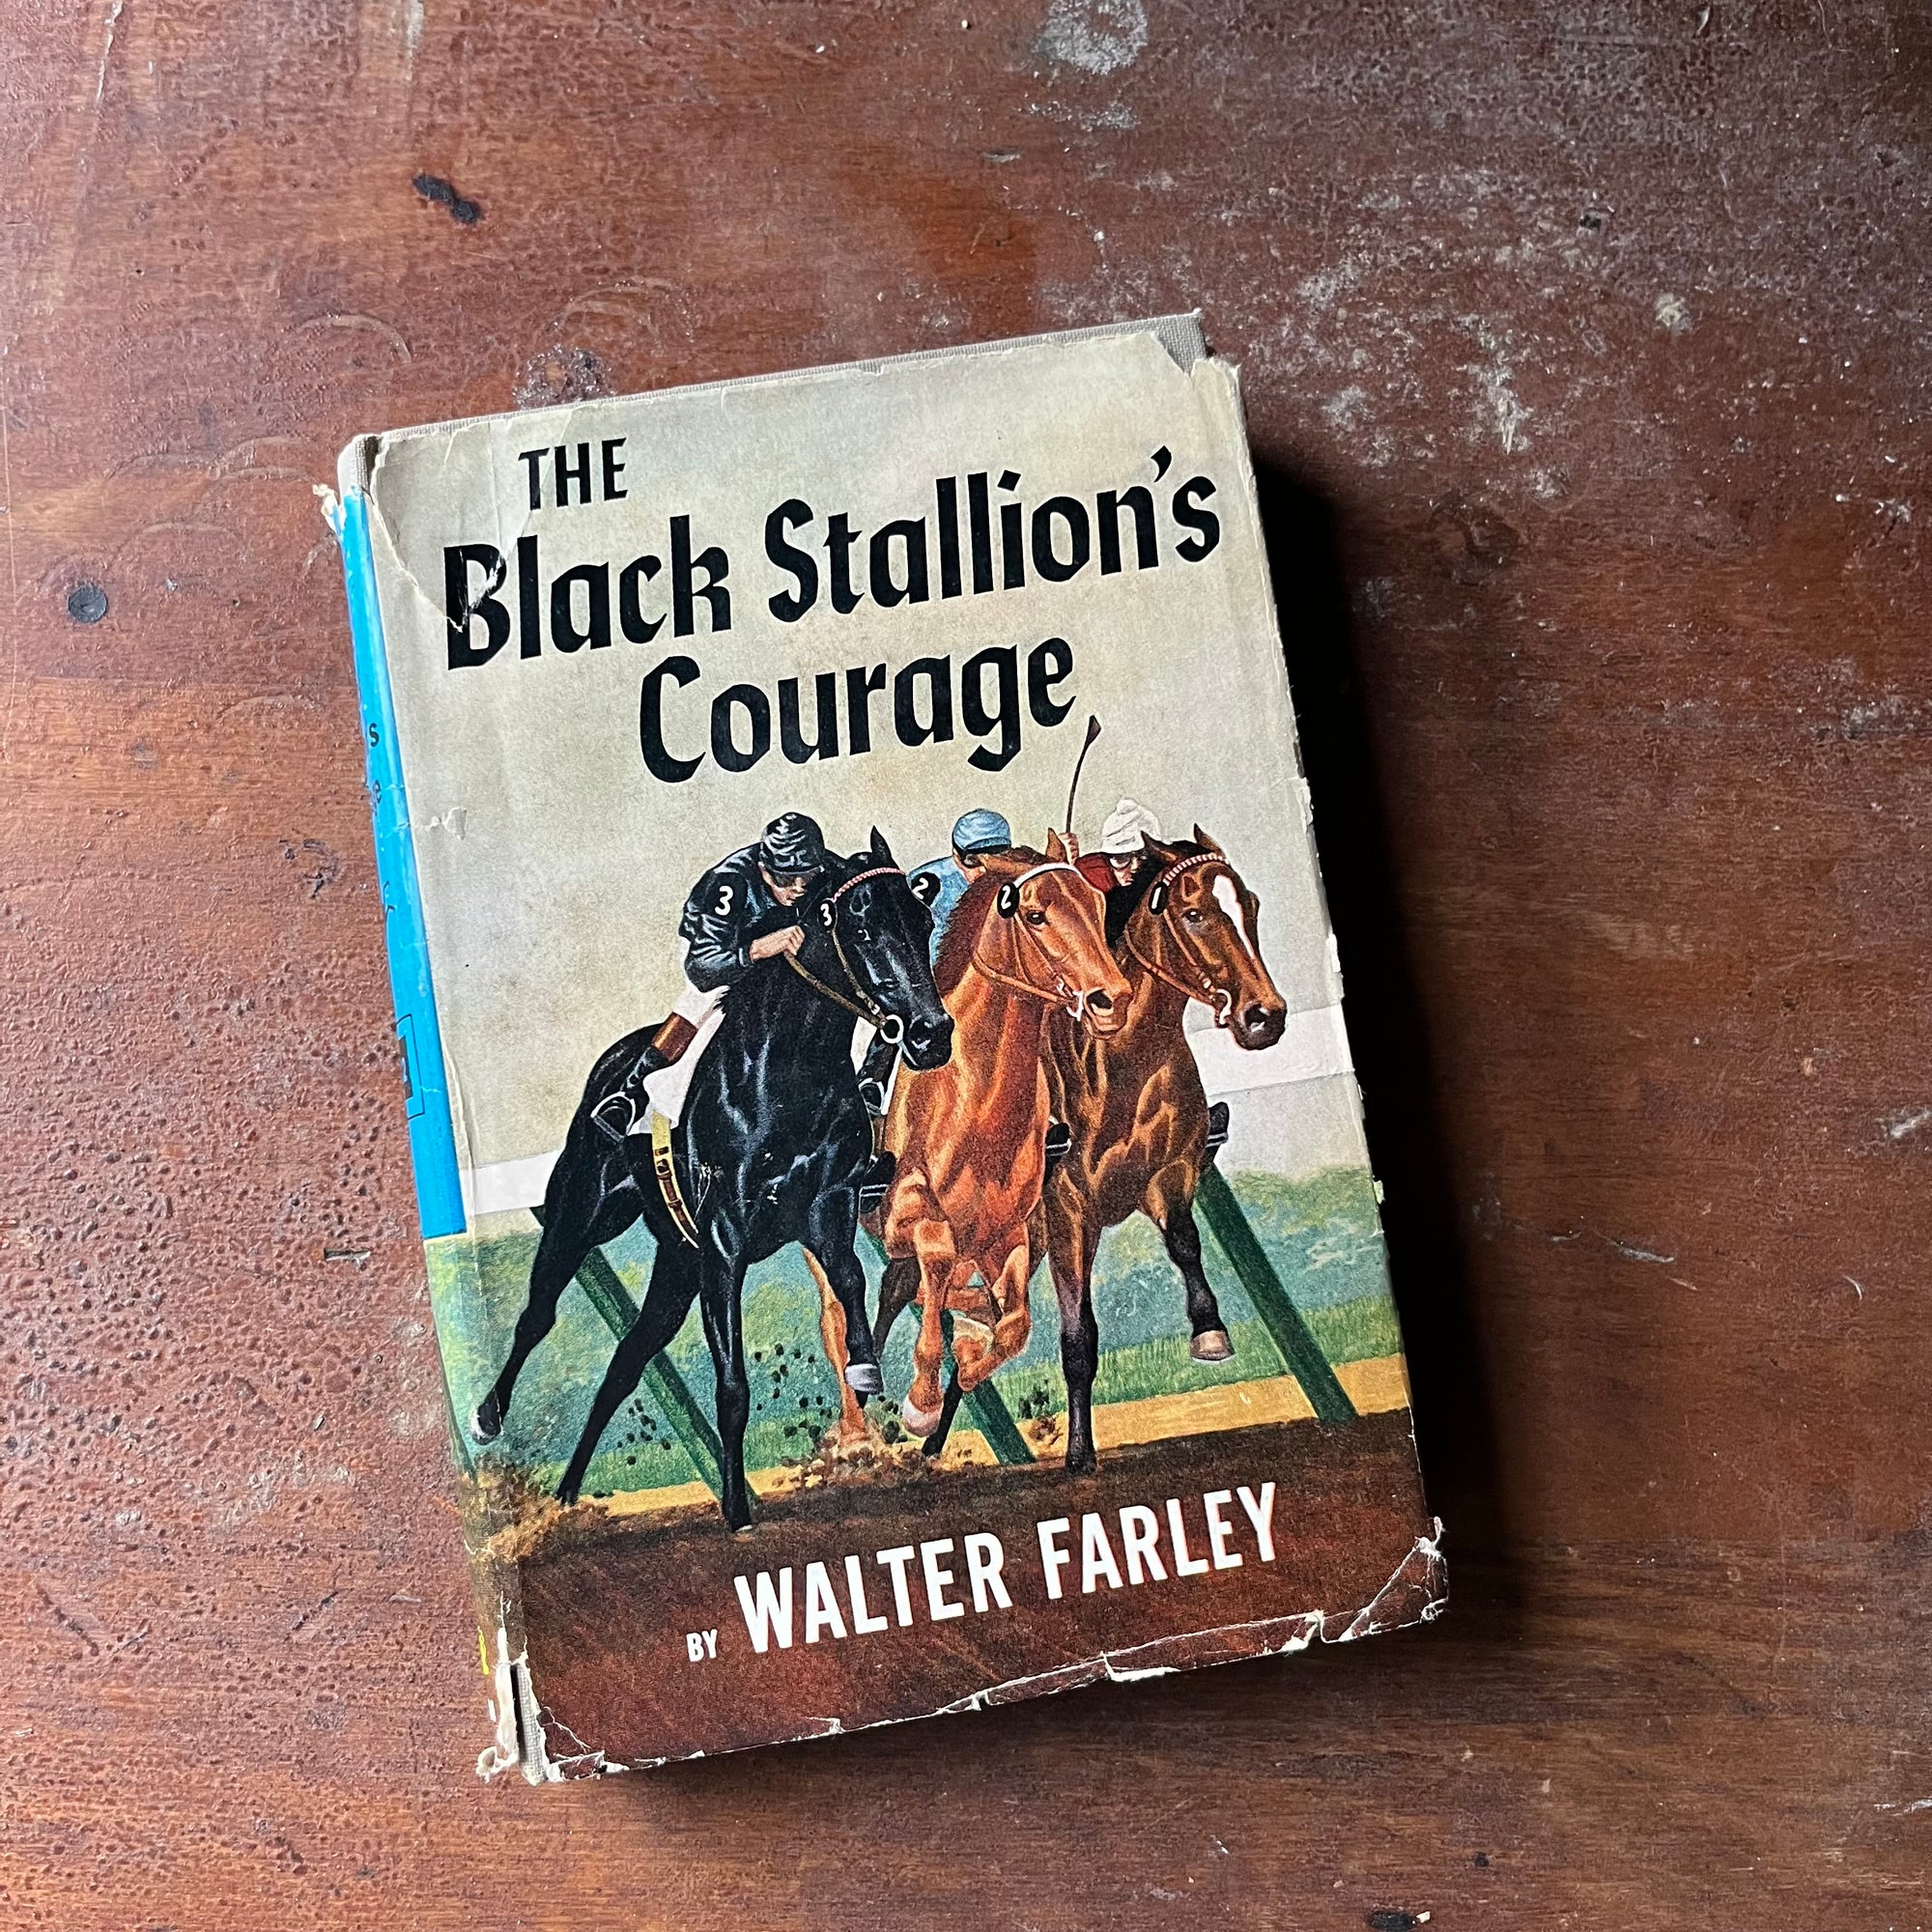 vintage chapter book for children, adventure book for children, The Black Stallion Book Series:  The Black Stallion's Courage #12 written by Walter Farley - view of the dust jacket's front cover